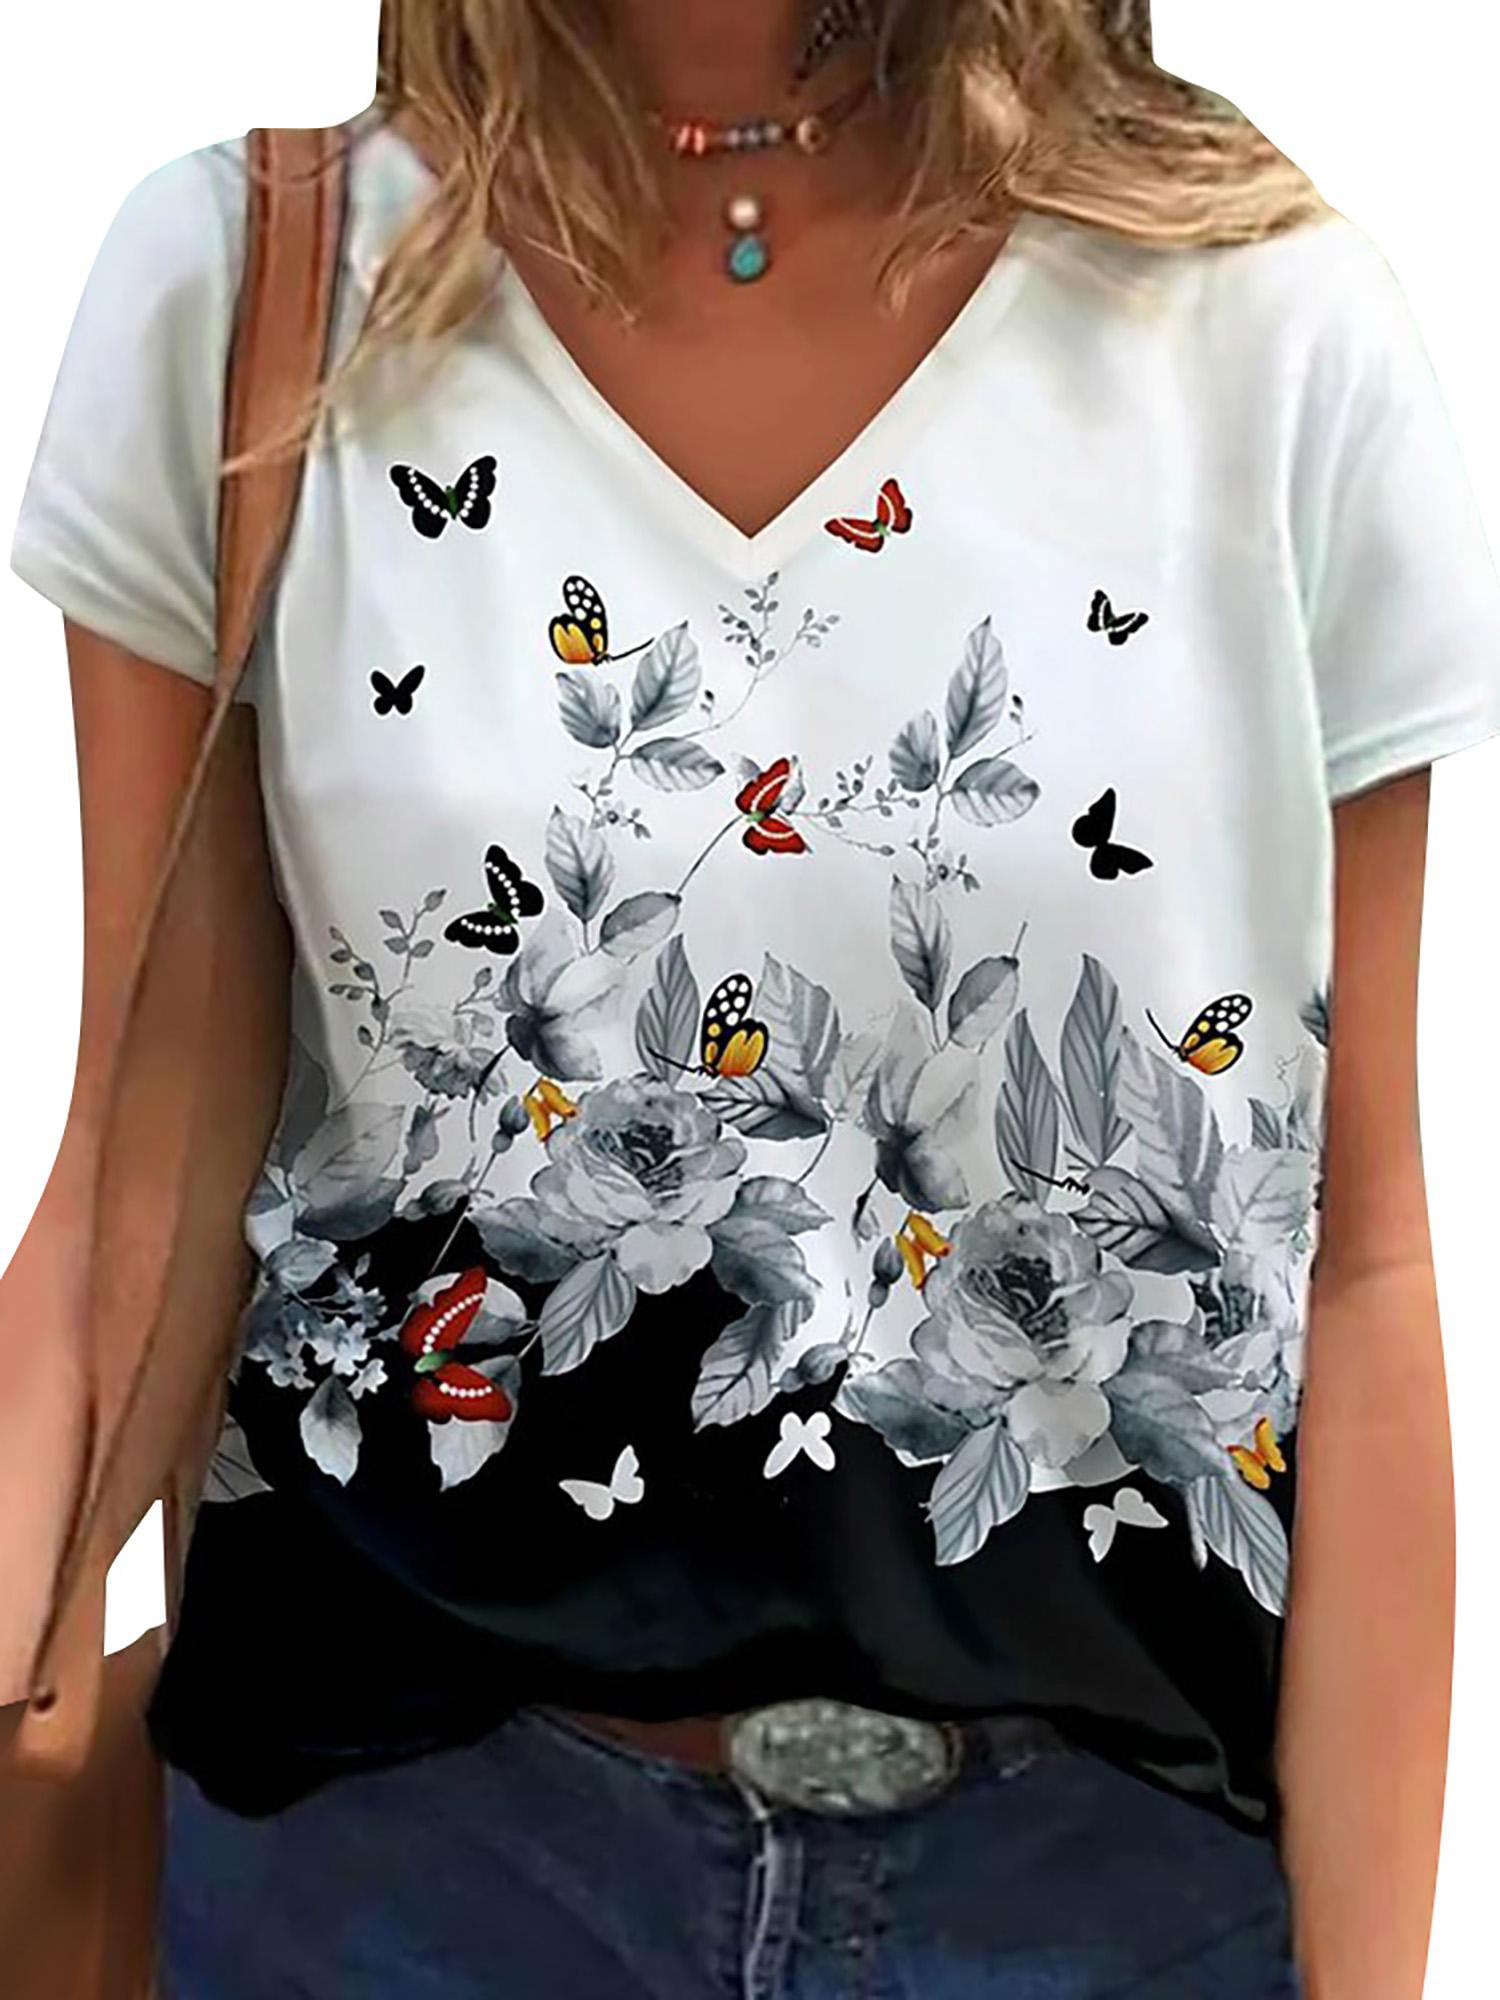 Summer Tops for Women Casual Butterfly Printed T-Shirts Lapel V Neck Tunic Top Zipper Short Sleeve Graphic Tee Blouse